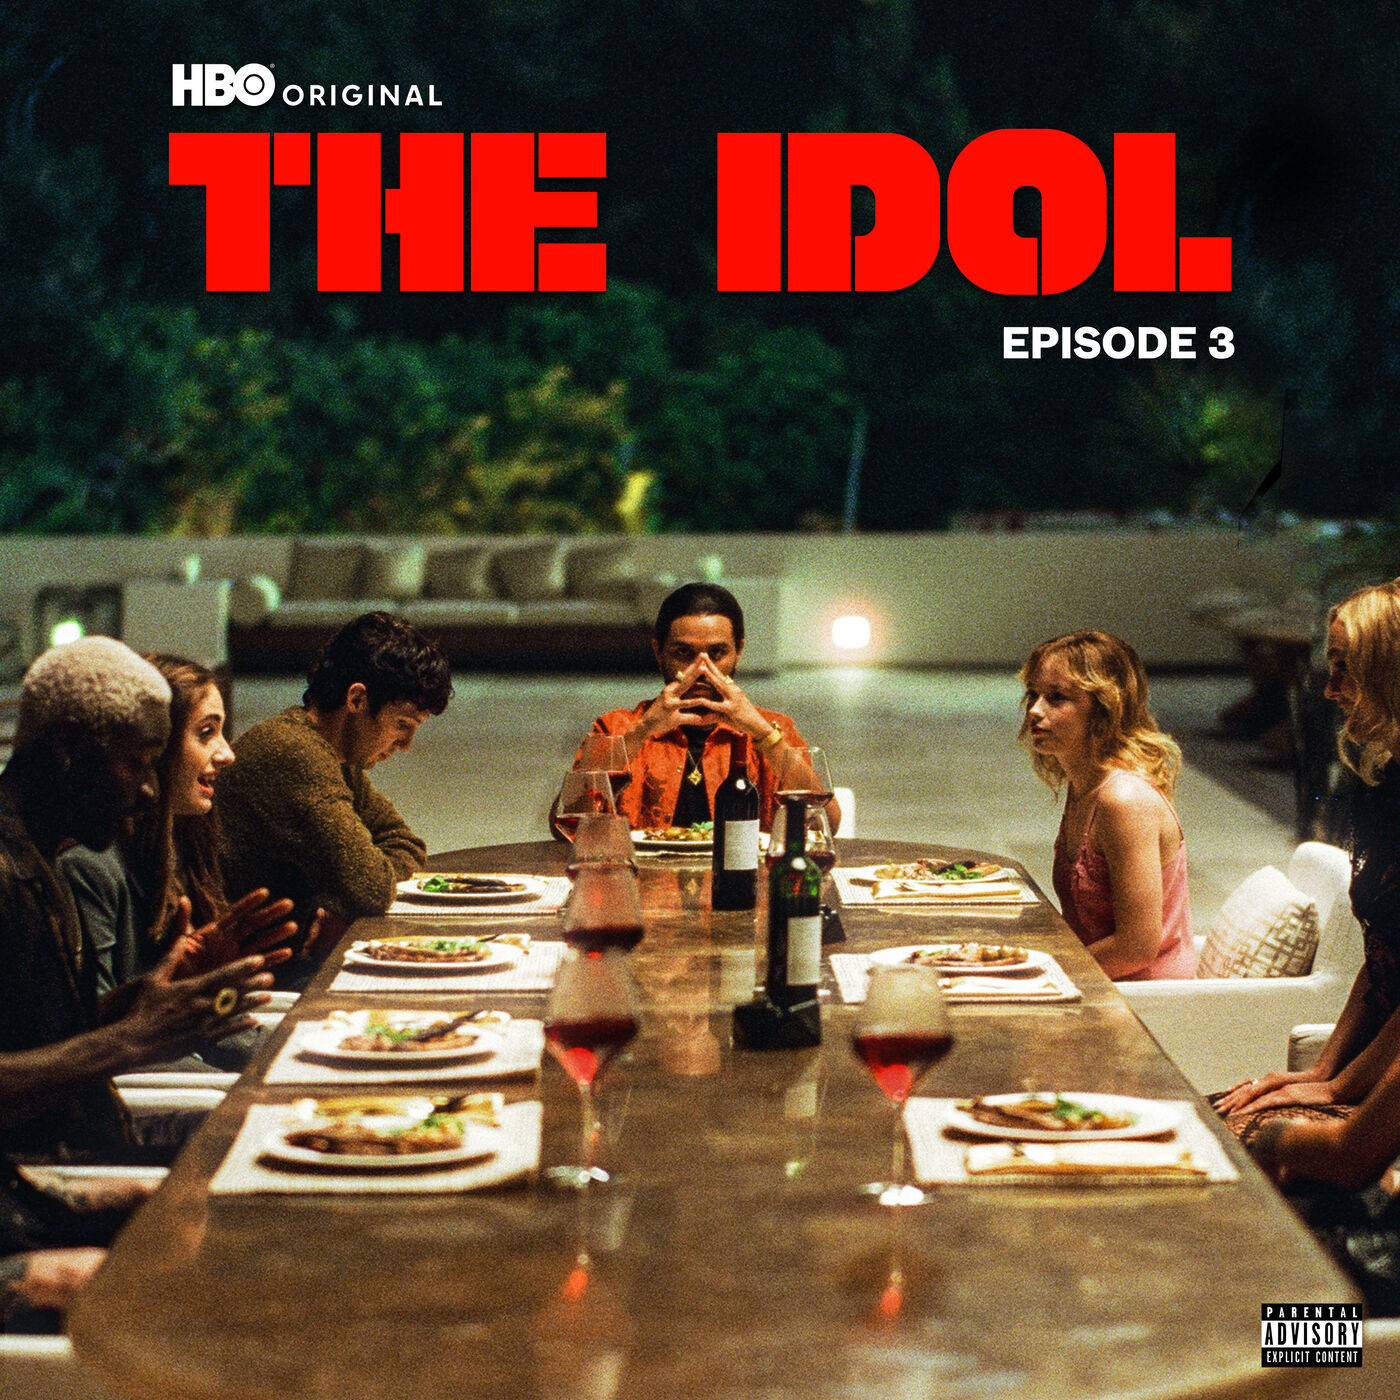 The Weeknd – The Idol Episode 3 (Music from the HBO Original Series)Ⓔ【88.2kHz／24bit】美国区-OppsUpro音乐帝国